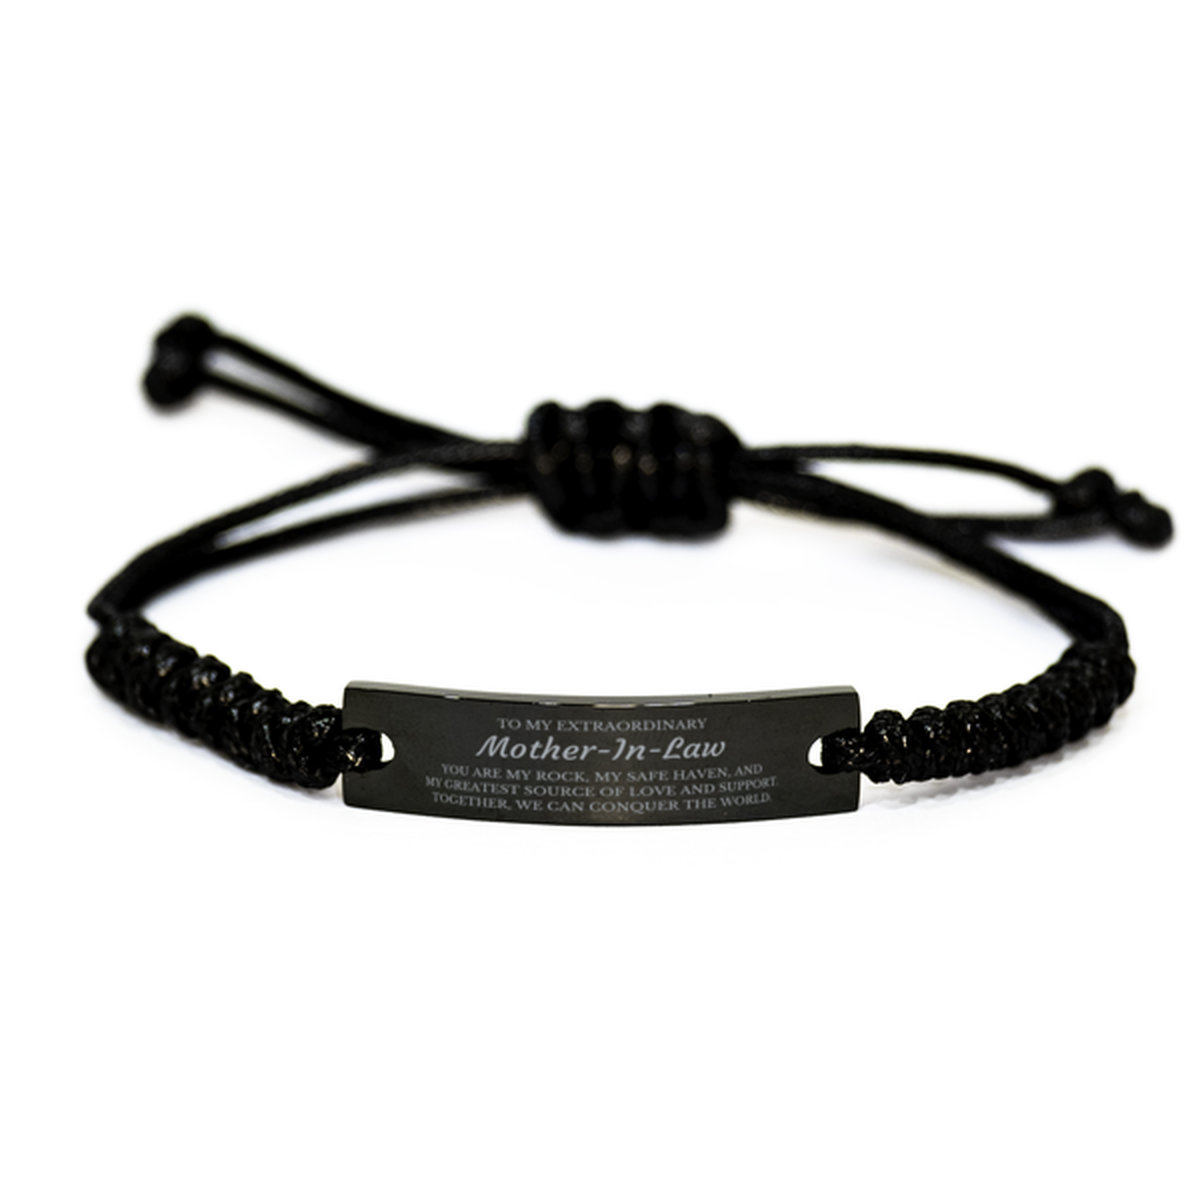 To My Extraordinary Mother-In-Law Gifts, Together, we can conquer the world, Birthday Black Rope Bracelet For Mother-In-Law, Christmas Gifts For Mother-In-Law